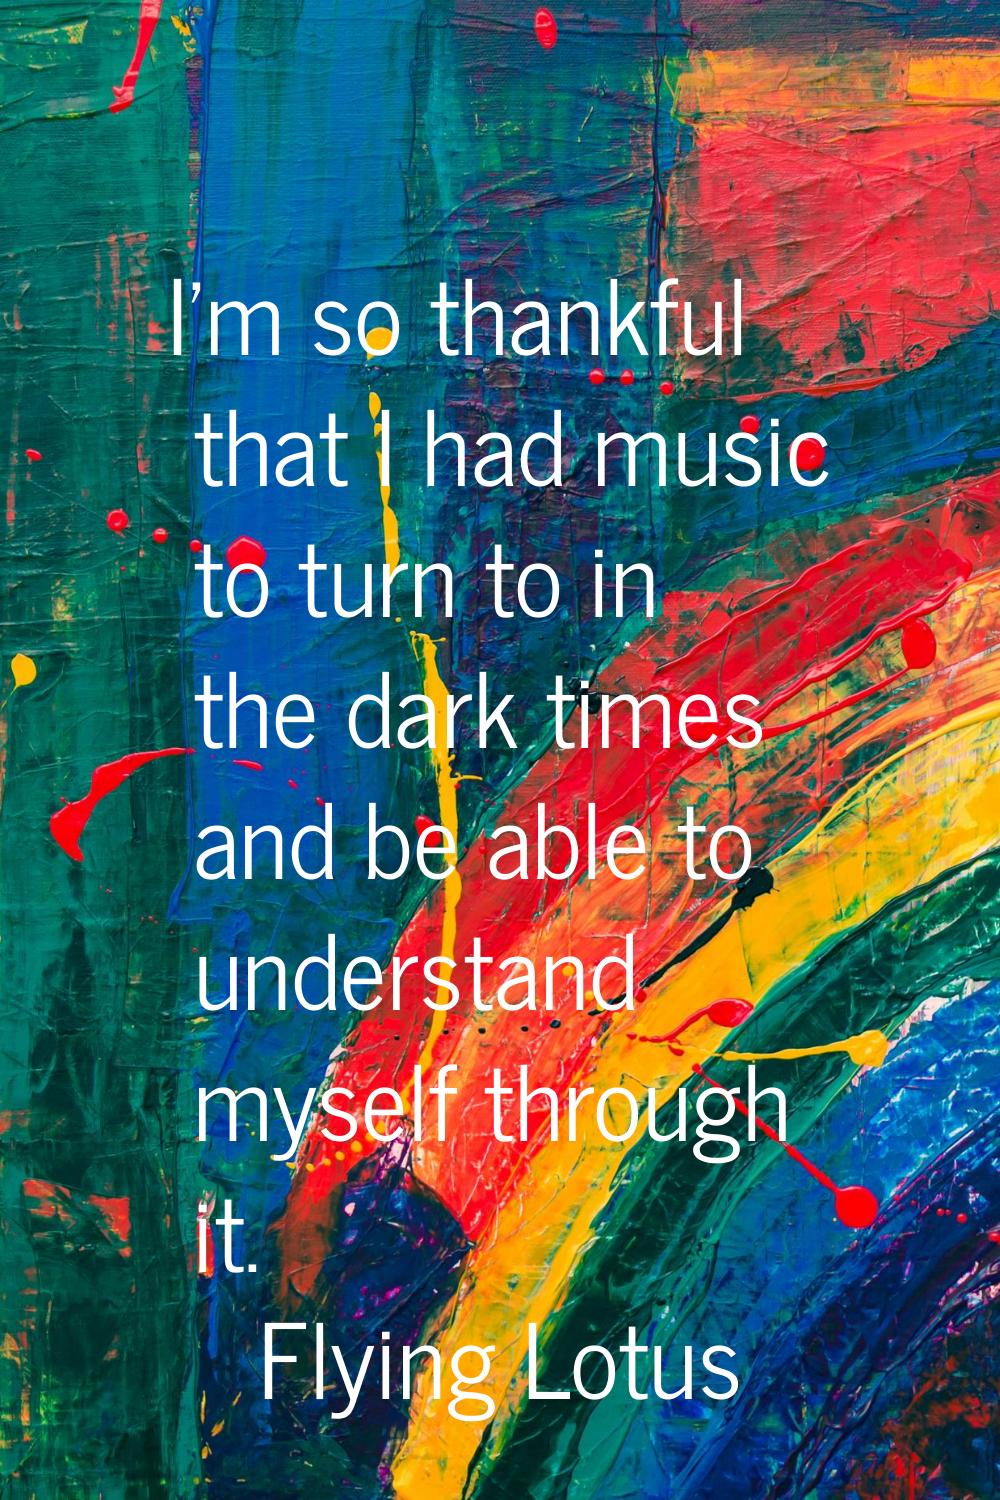 I'm so thankful that I had music to turn to in the dark times and be able to understand myself thro